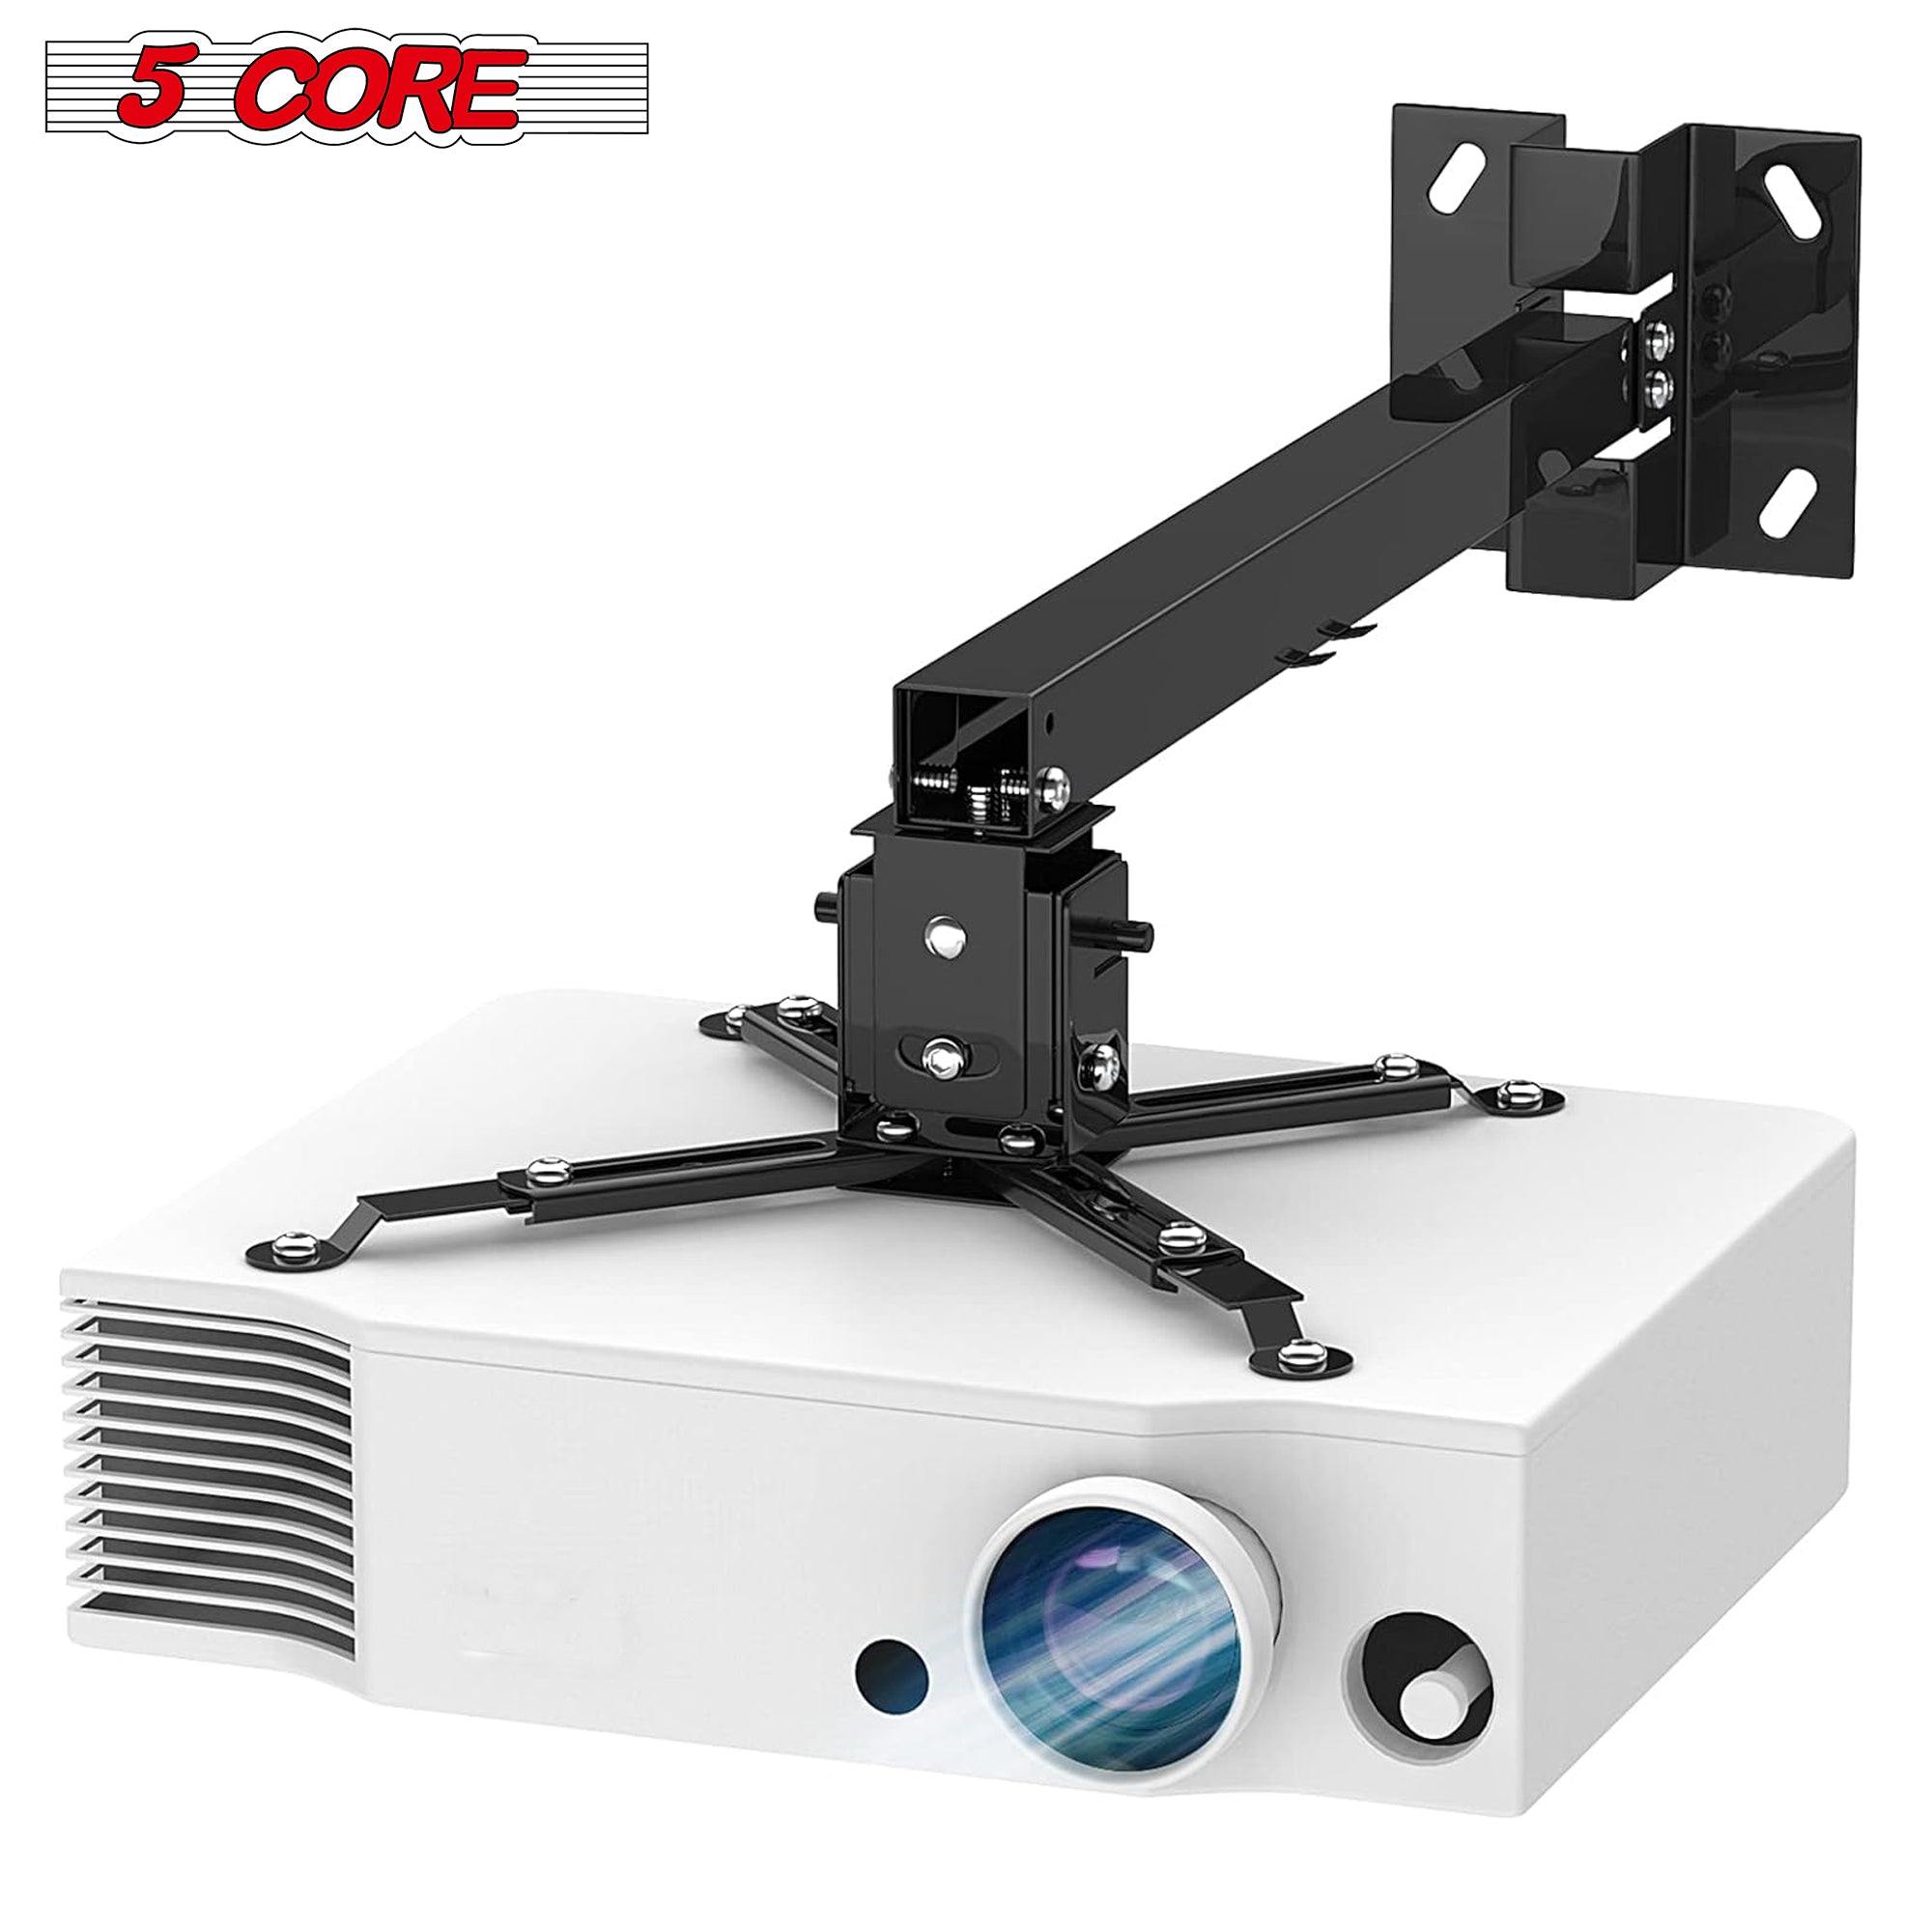 5 CORE Projector Ceiling Mount Universal Black Extendable HD Projector Stand